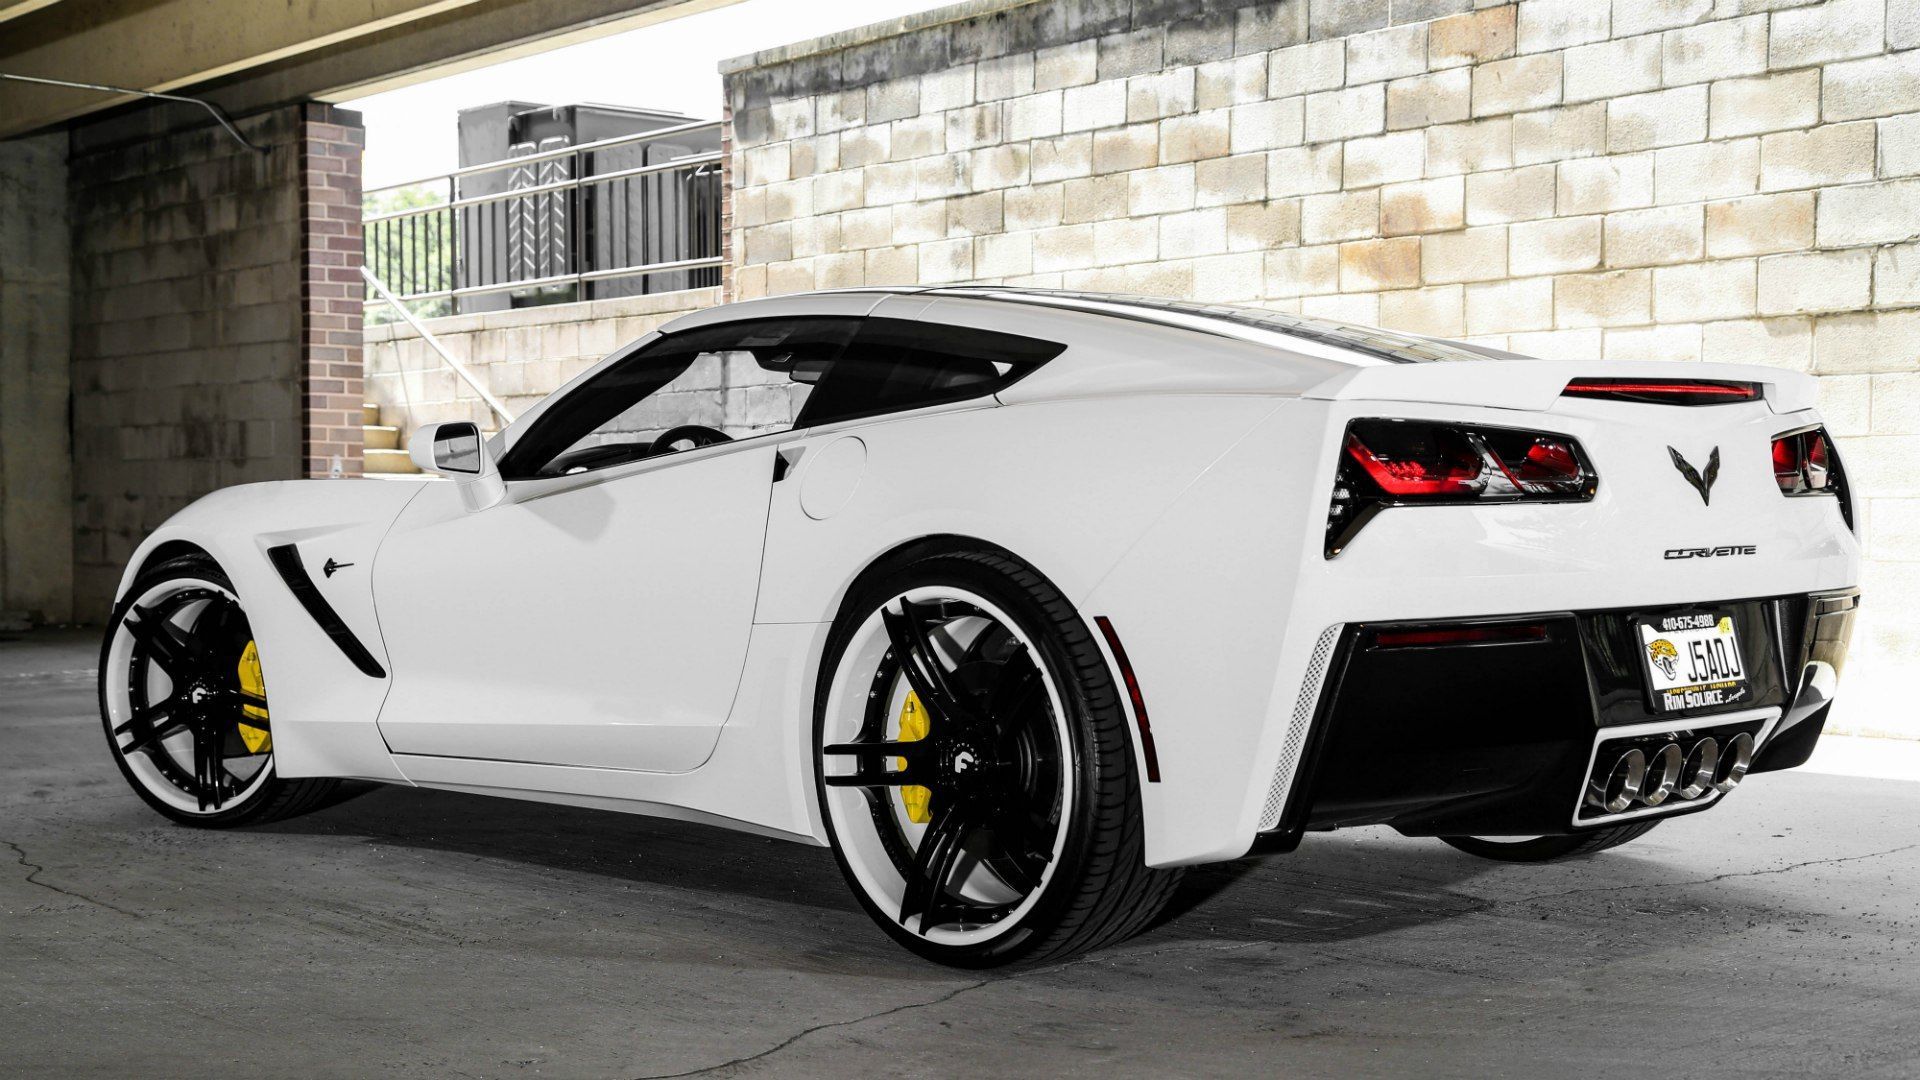 White car Chevrolet Corvette C7 wallpapers and images - wallpapers ...